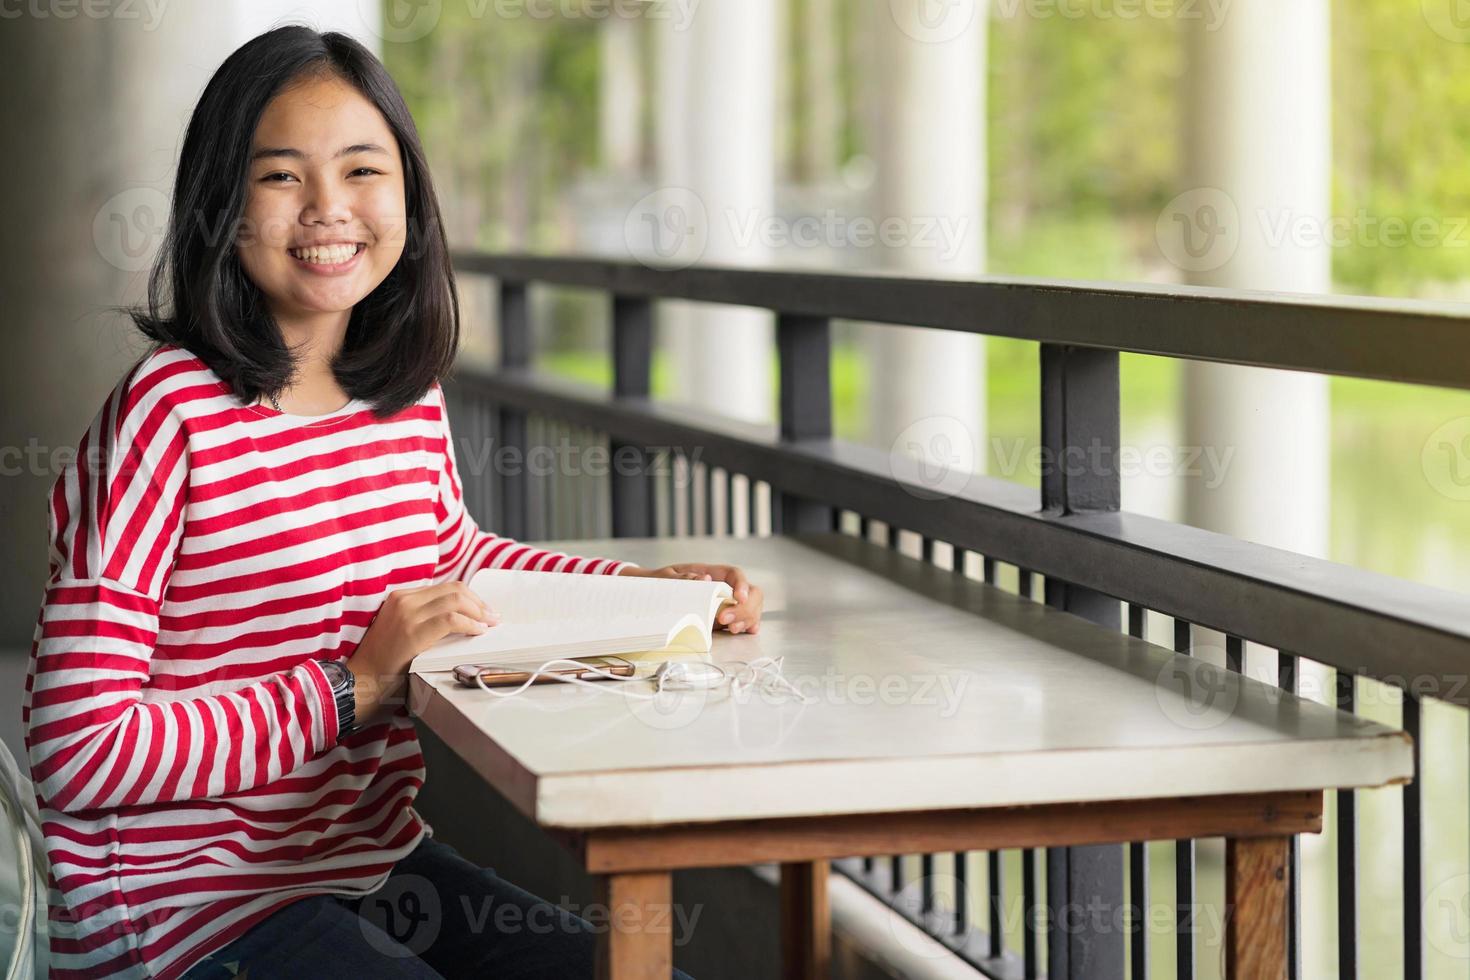 Asian student girl sitting and smiling reading a book in the school photo